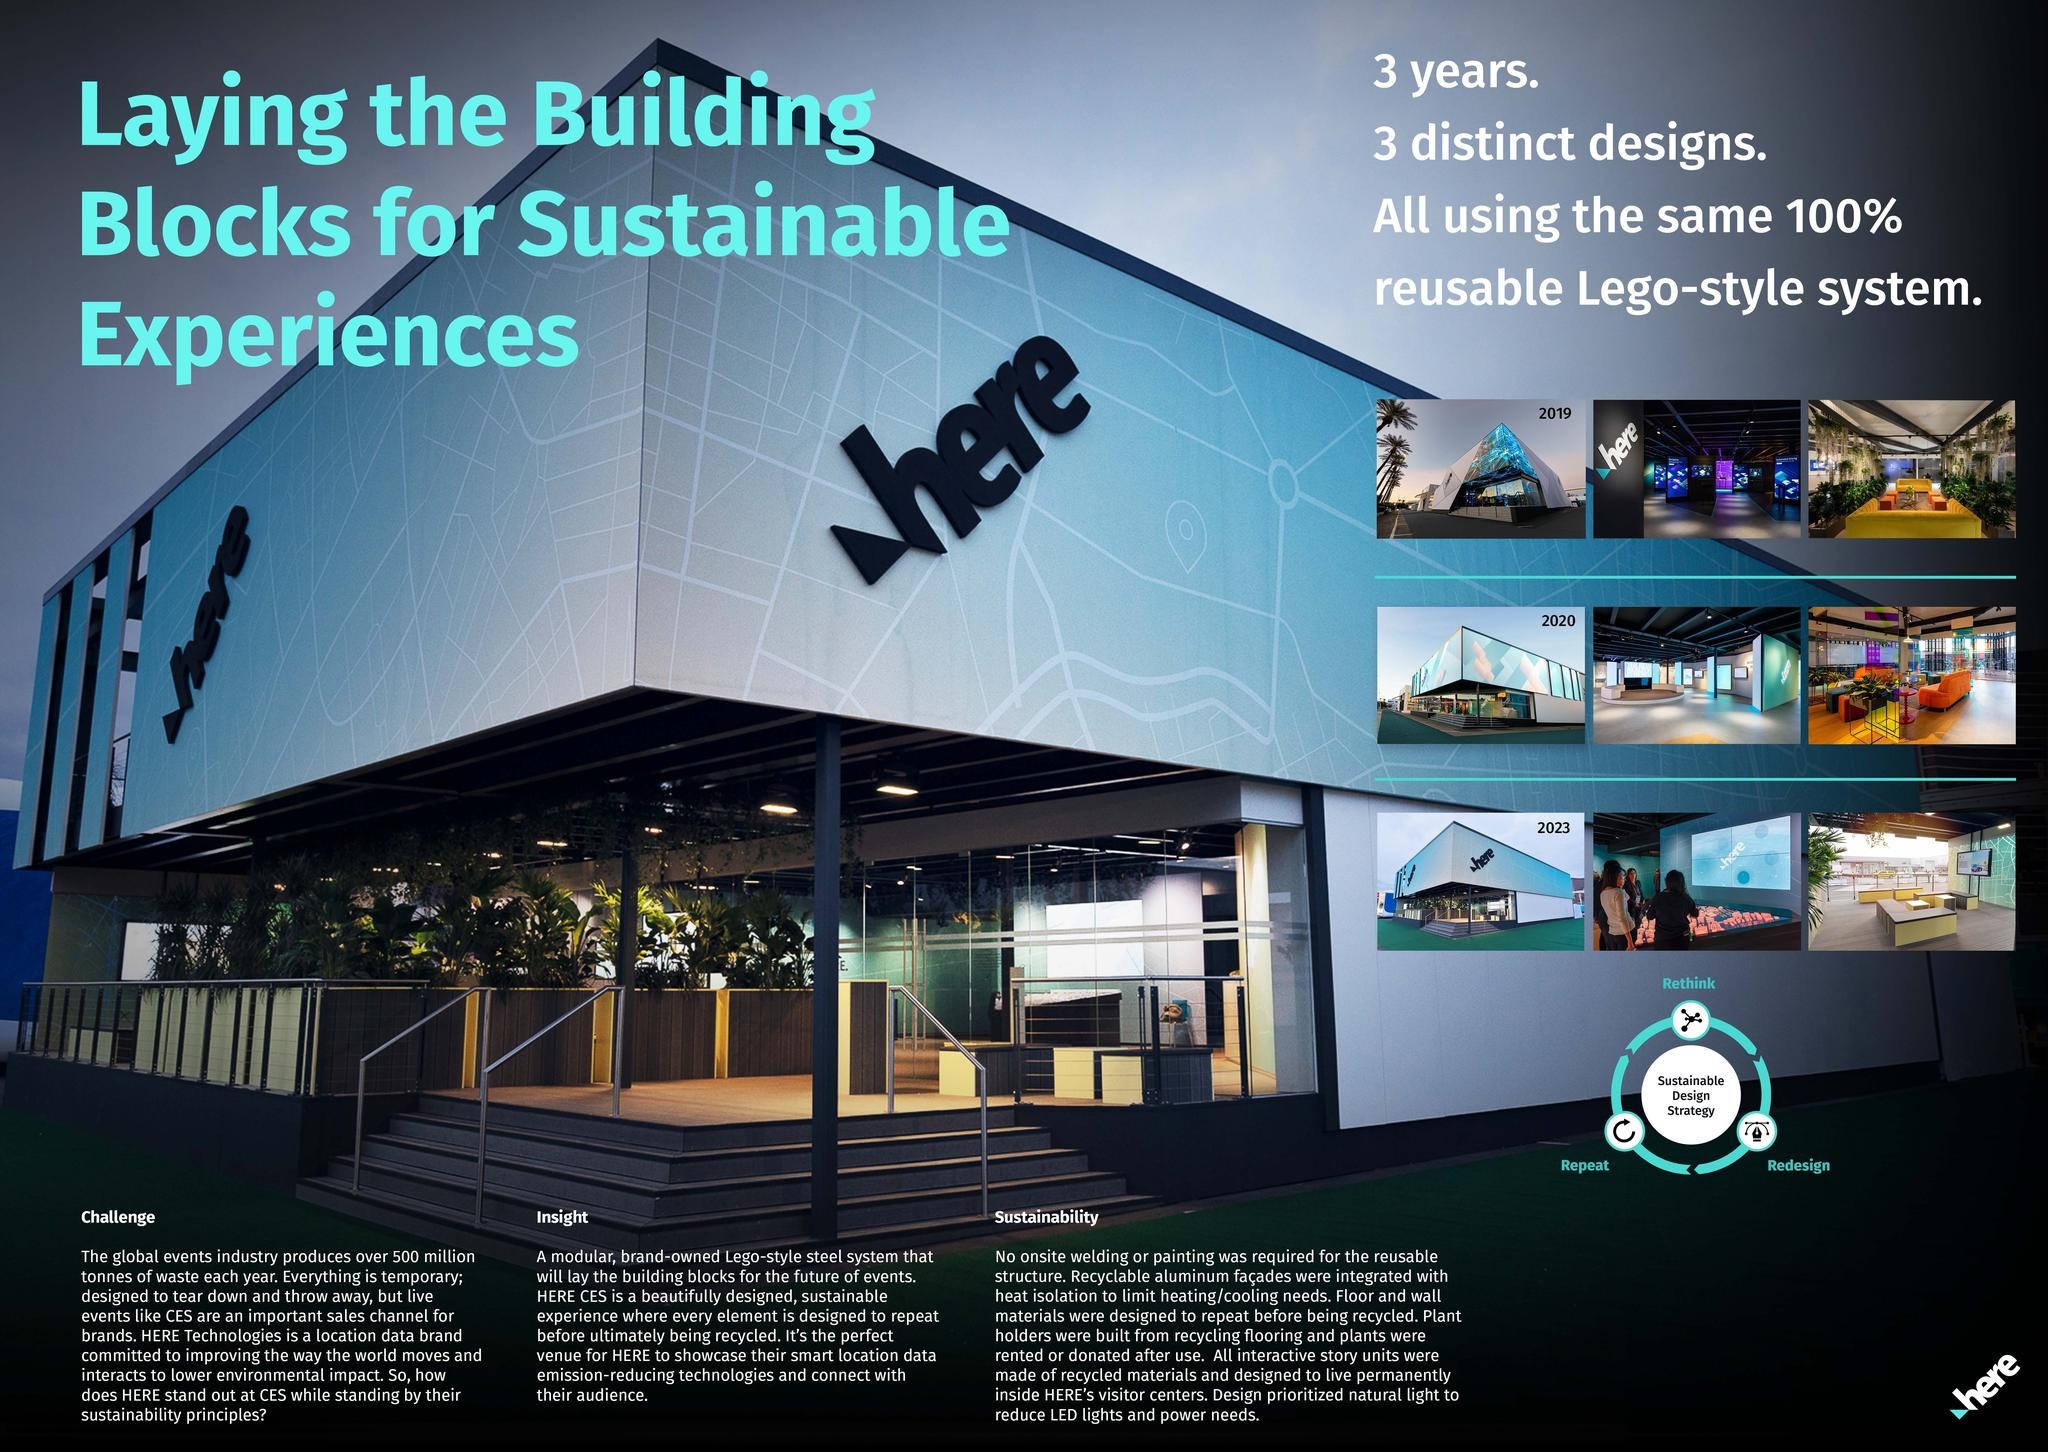 HERE CES: Laying the Building Blocks for Sustainable Experiences